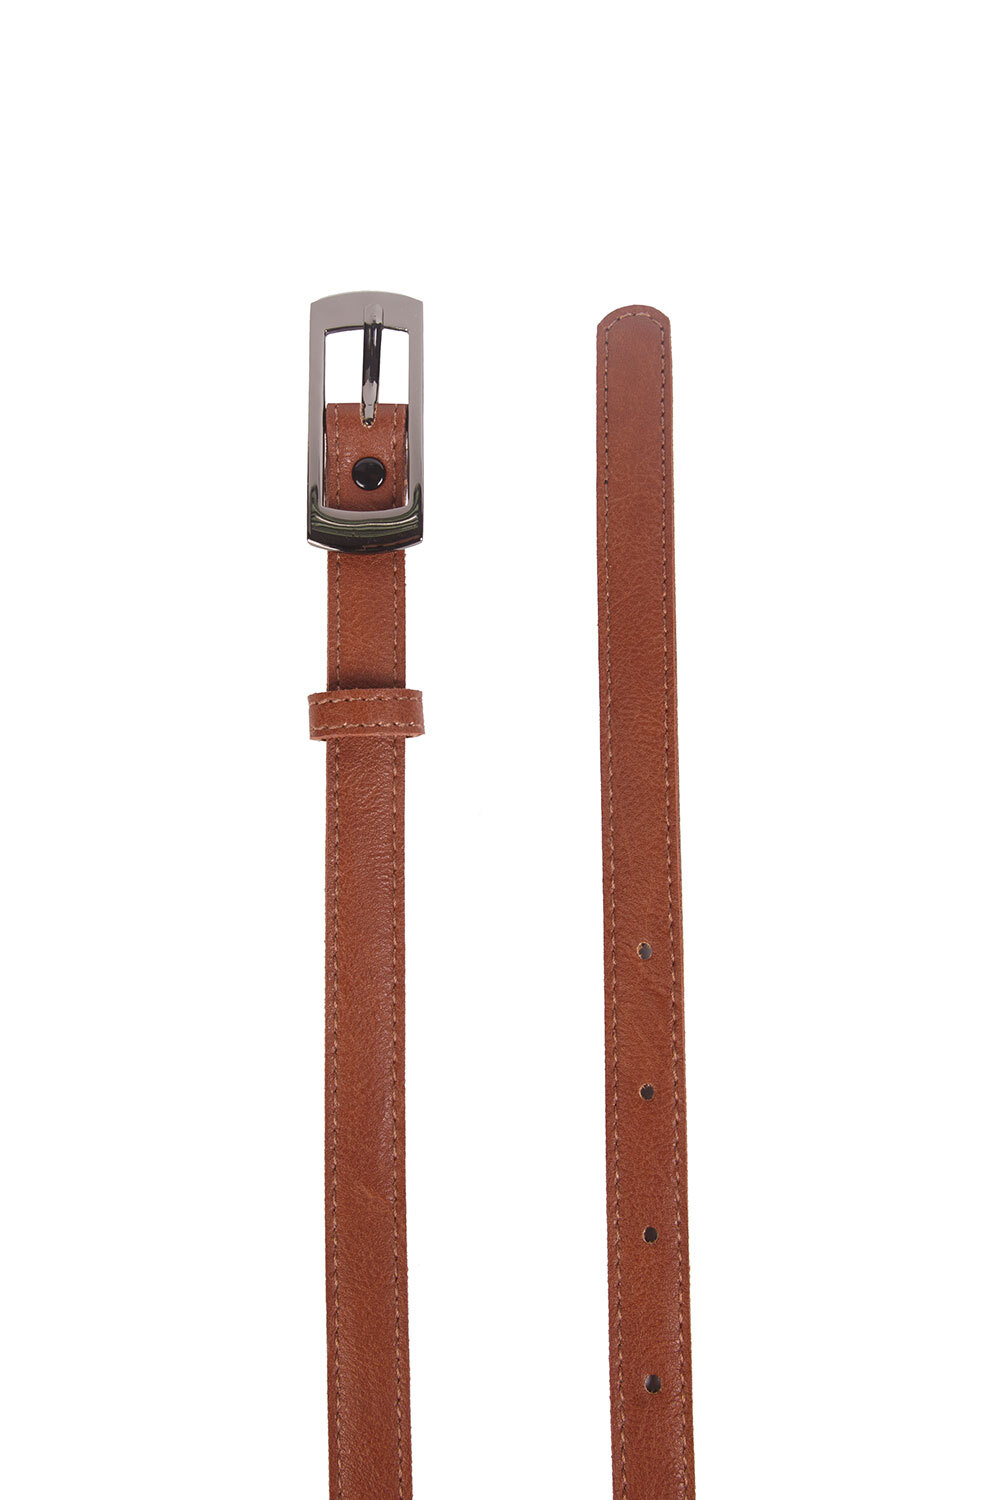 Narrow strap made of eco leather